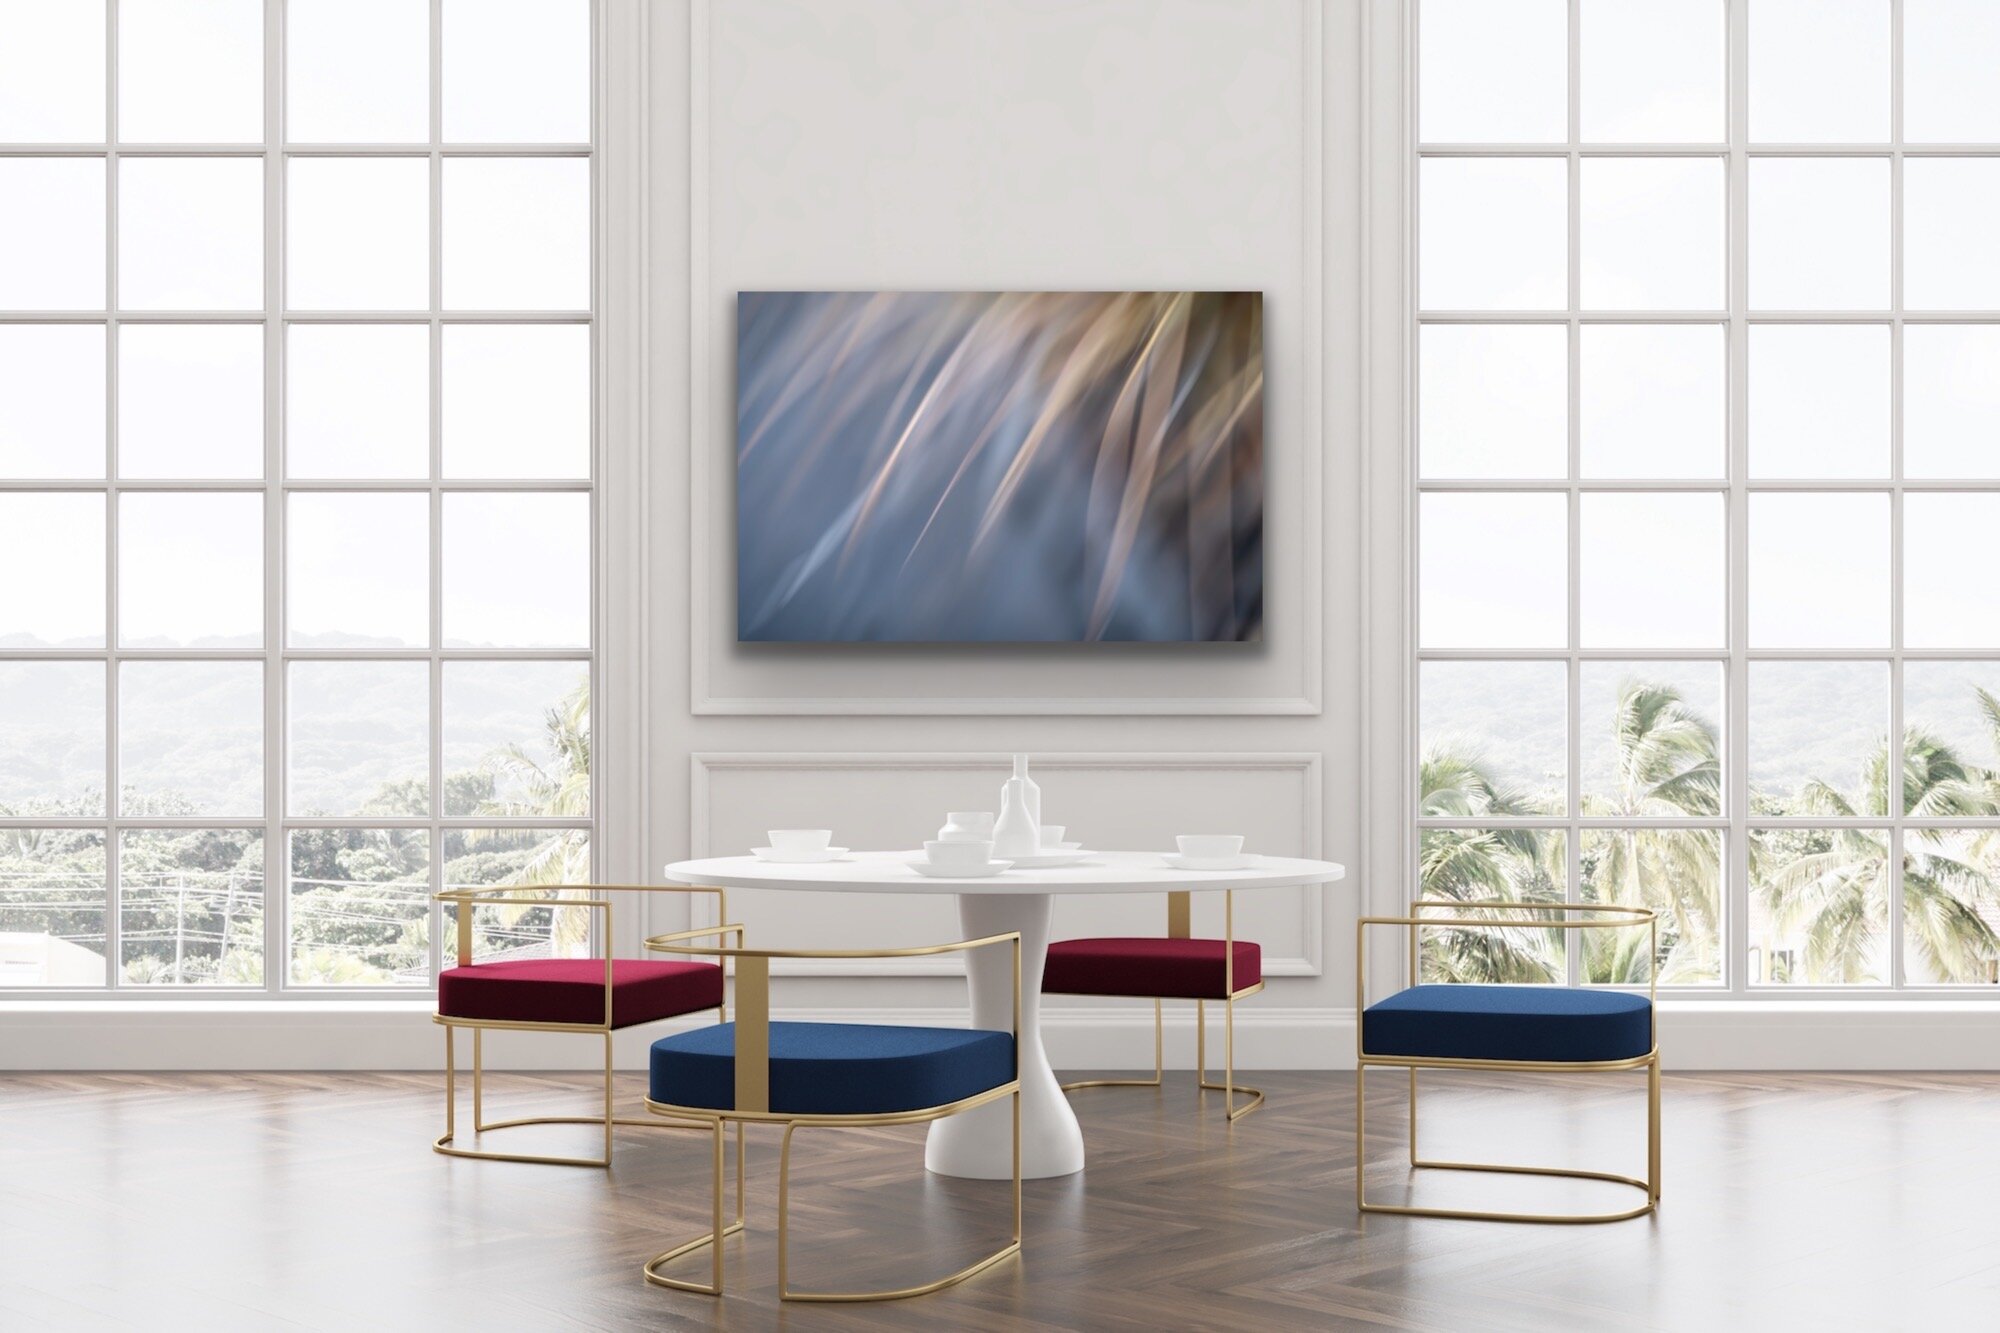  Various options are possible for this motive, frameless acrylic prints (printed directly onto the back of a 4mm acrylic sheet and mounted to the wall with chrome spacers), prints on metallic or Hahnemühle paper on aluminum dibond or framed, in vario